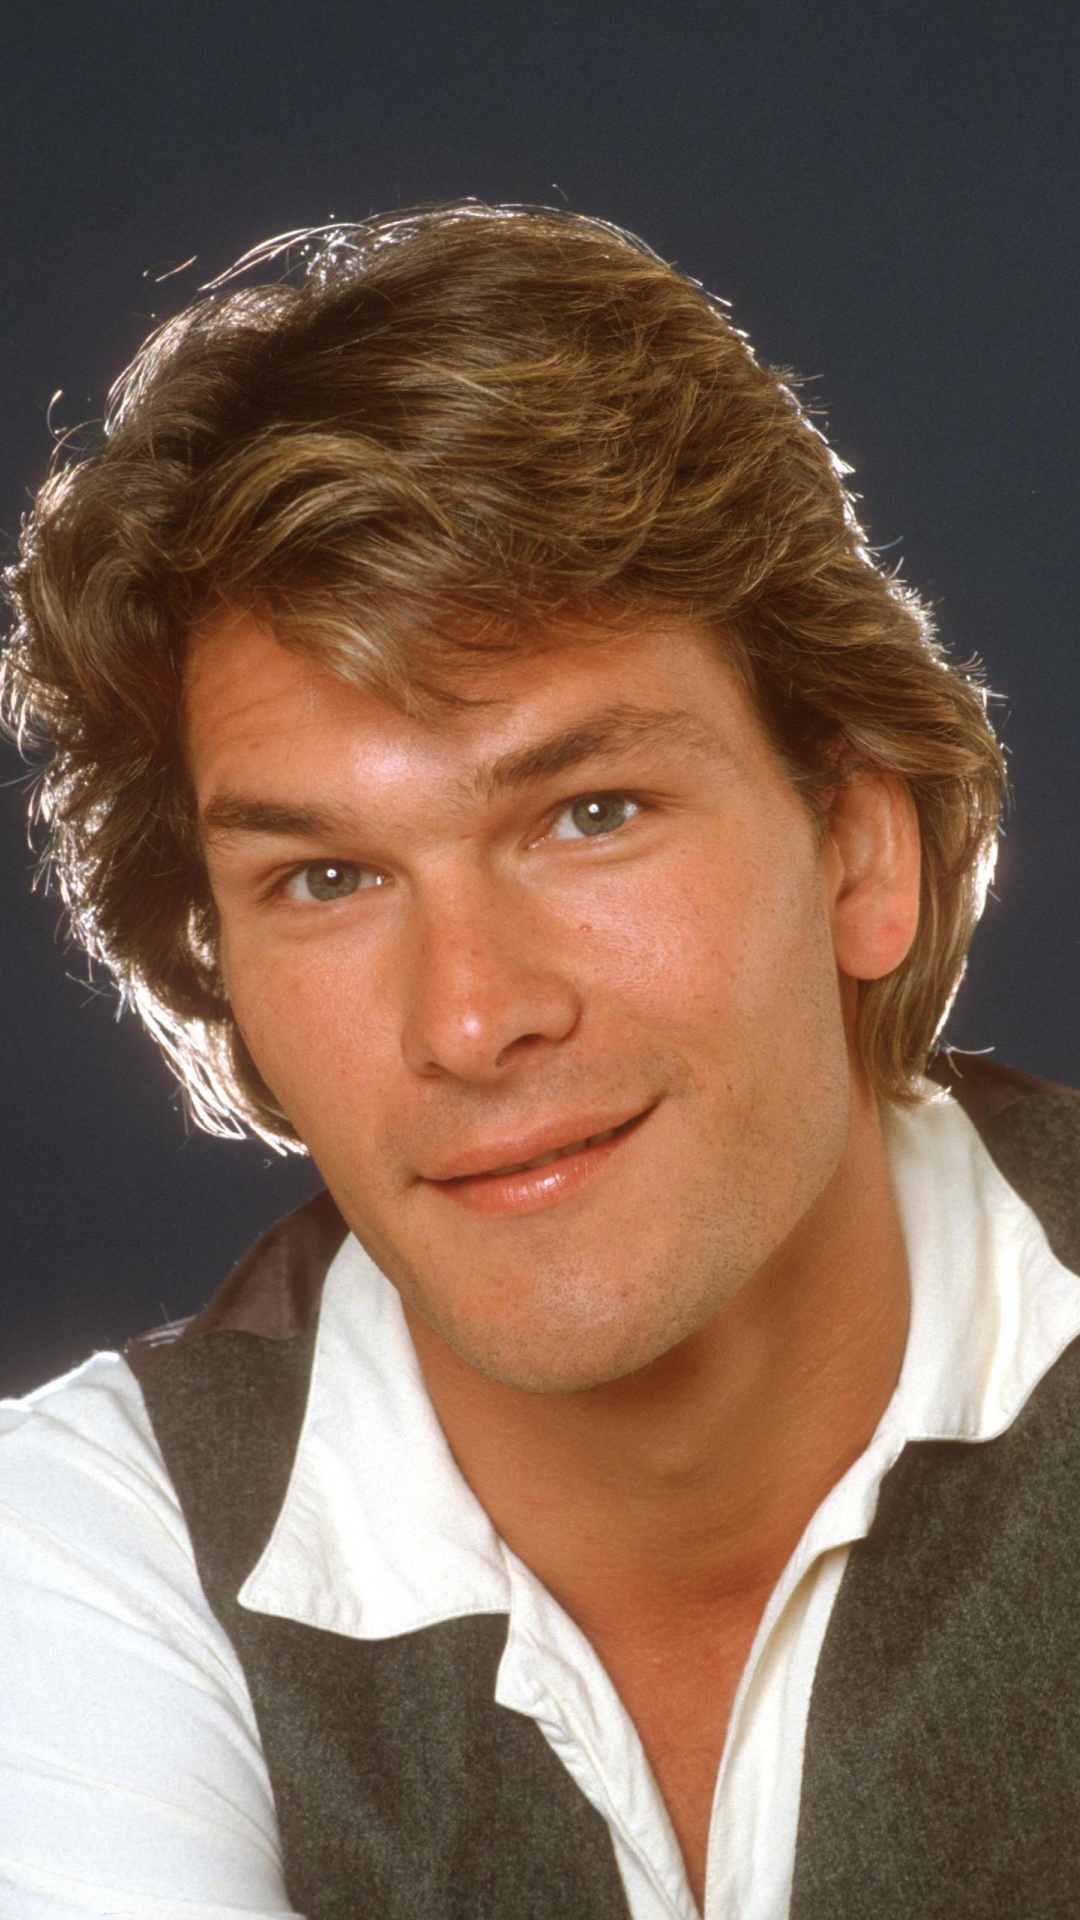 Patrick Swayze, Download 27 wallpapers, High Quality, Explore 27 wallpapers, 1080x1920 Full HD Phone